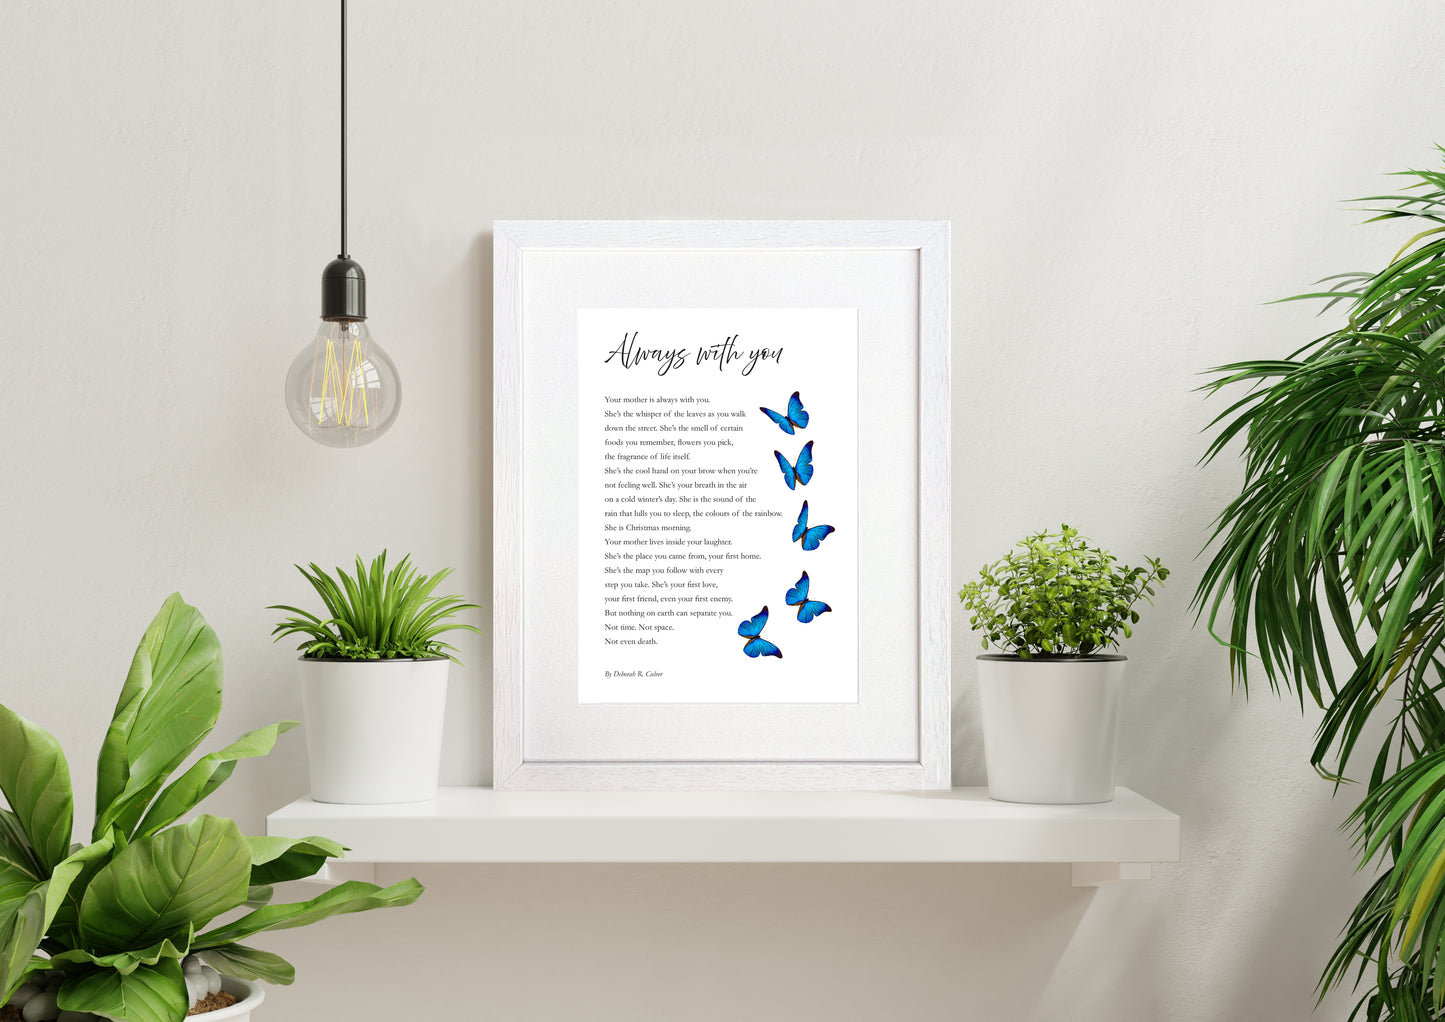 "Your mother is always with you" framed gift